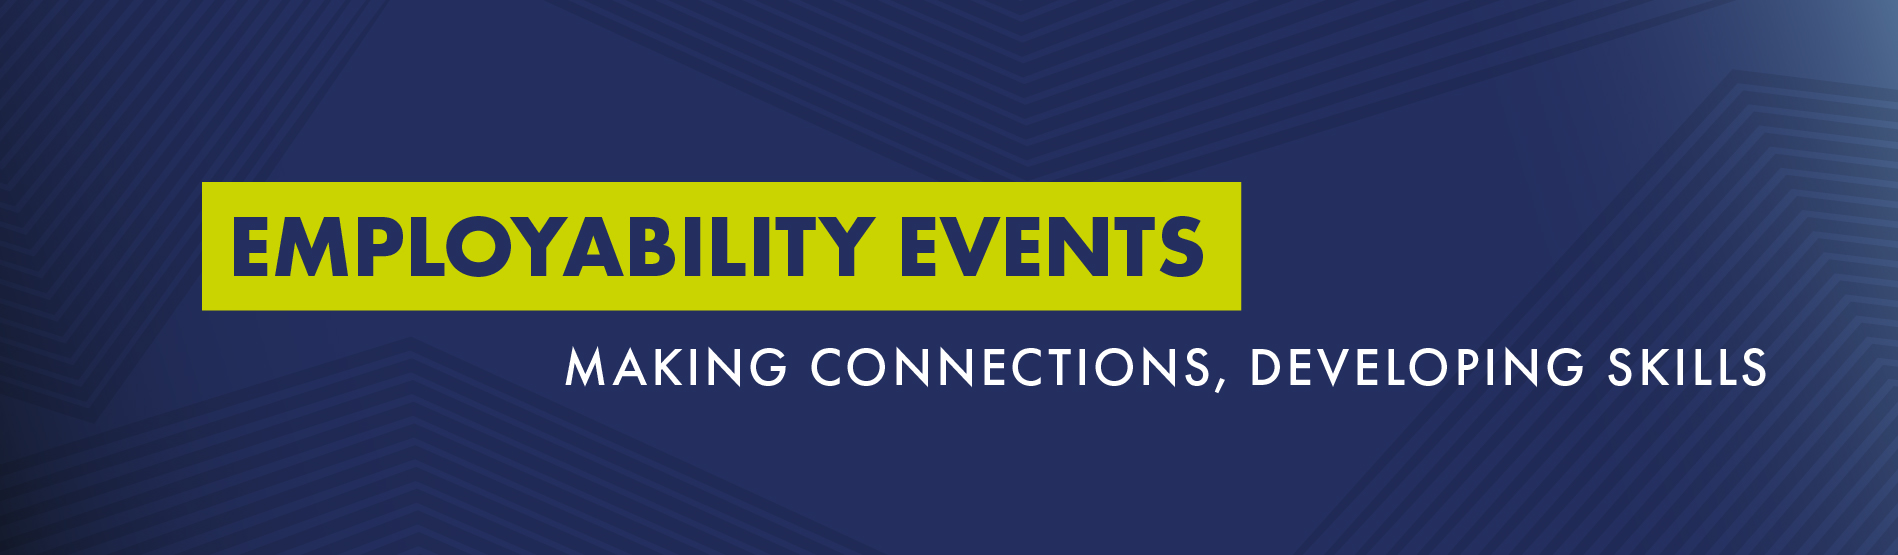 Employability Events: Making connections, developing skills